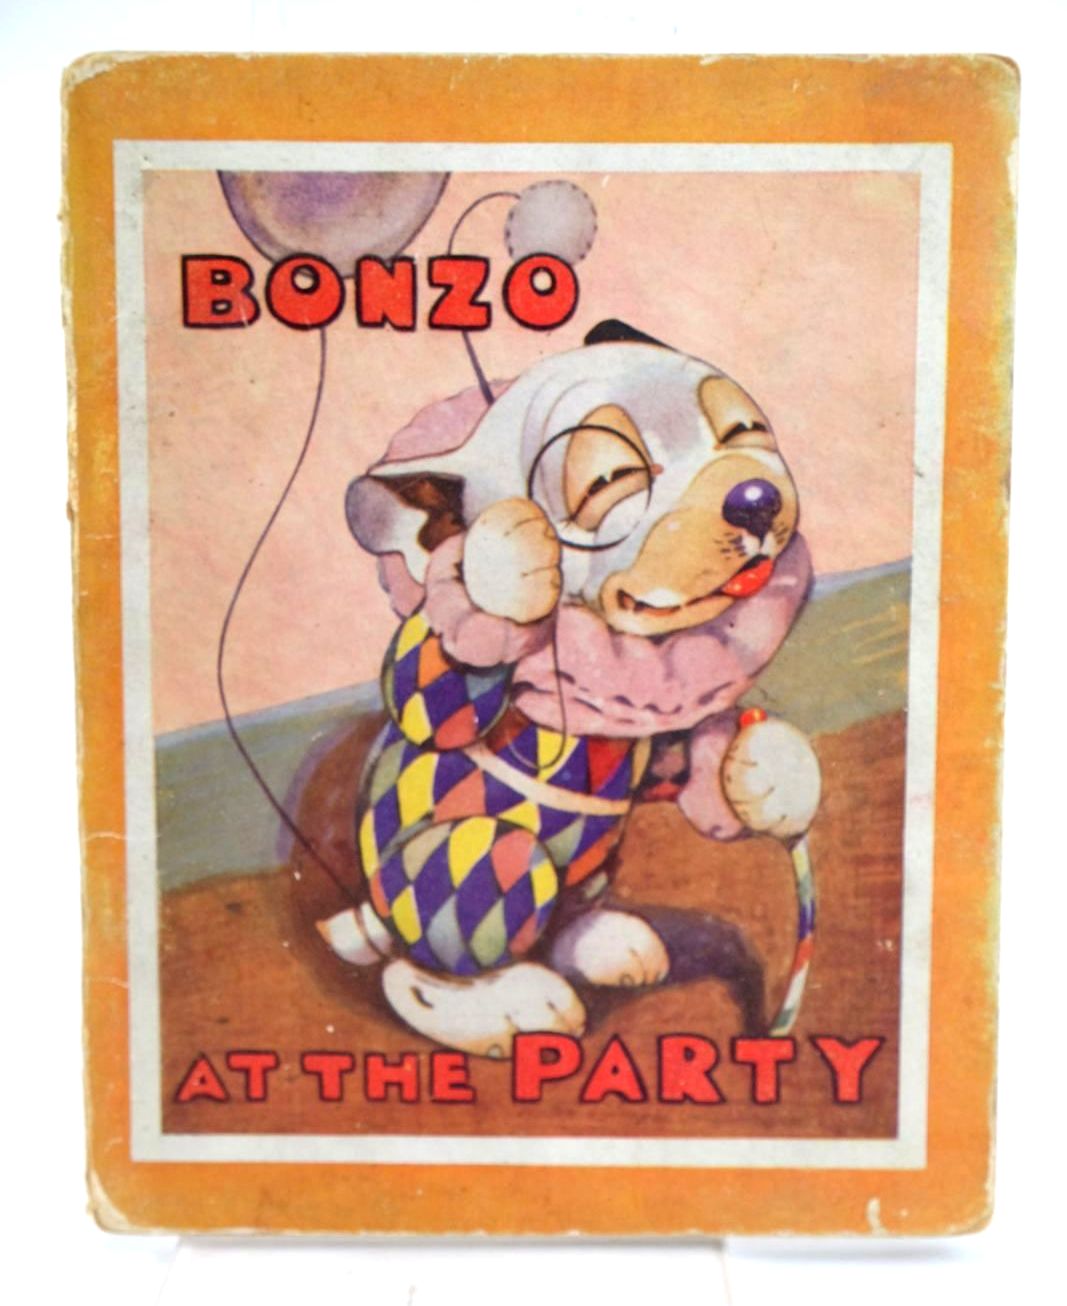 Photo of BONZO AT THE PARTY written by Studdy, G.E. Jellicoe, George illustrated by Studdy, G.E. published by John Swain &amp; Son Limited (STOCK CODE: 1319260)  for sale by Stella & Rose's Books